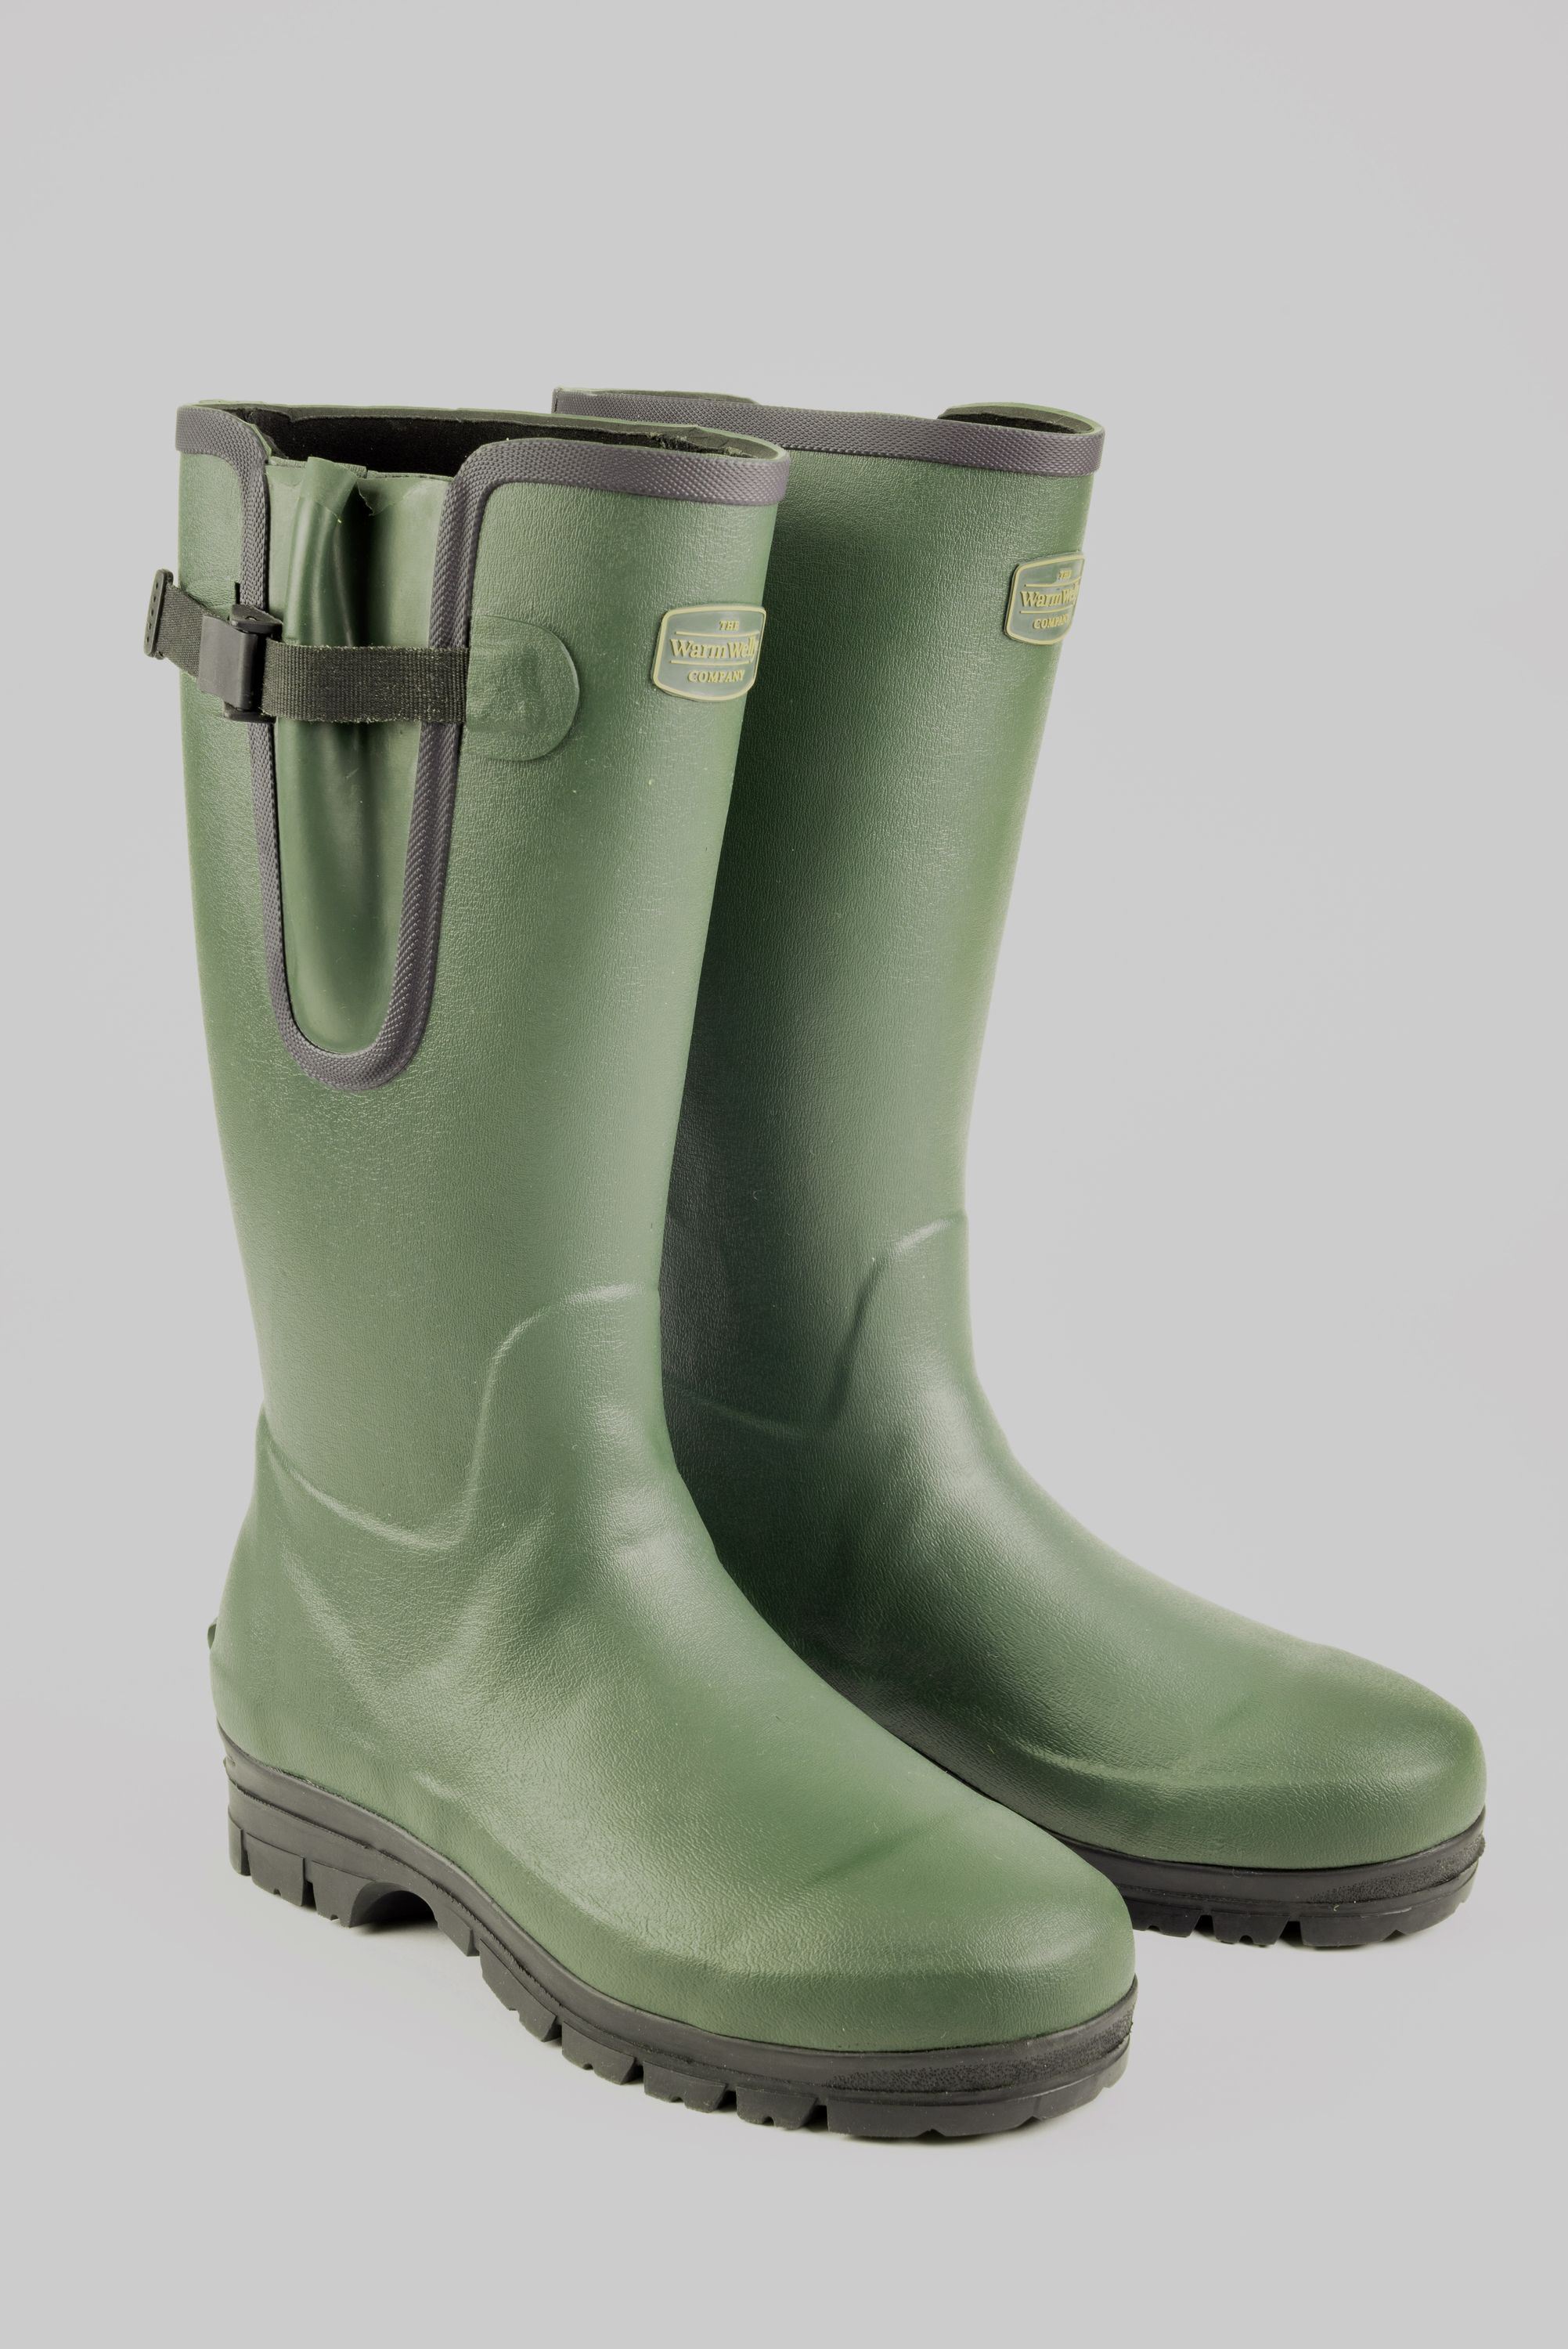 Seconds Green Men's Neoprene Lined Warm Wellies | The Warm Welly Company